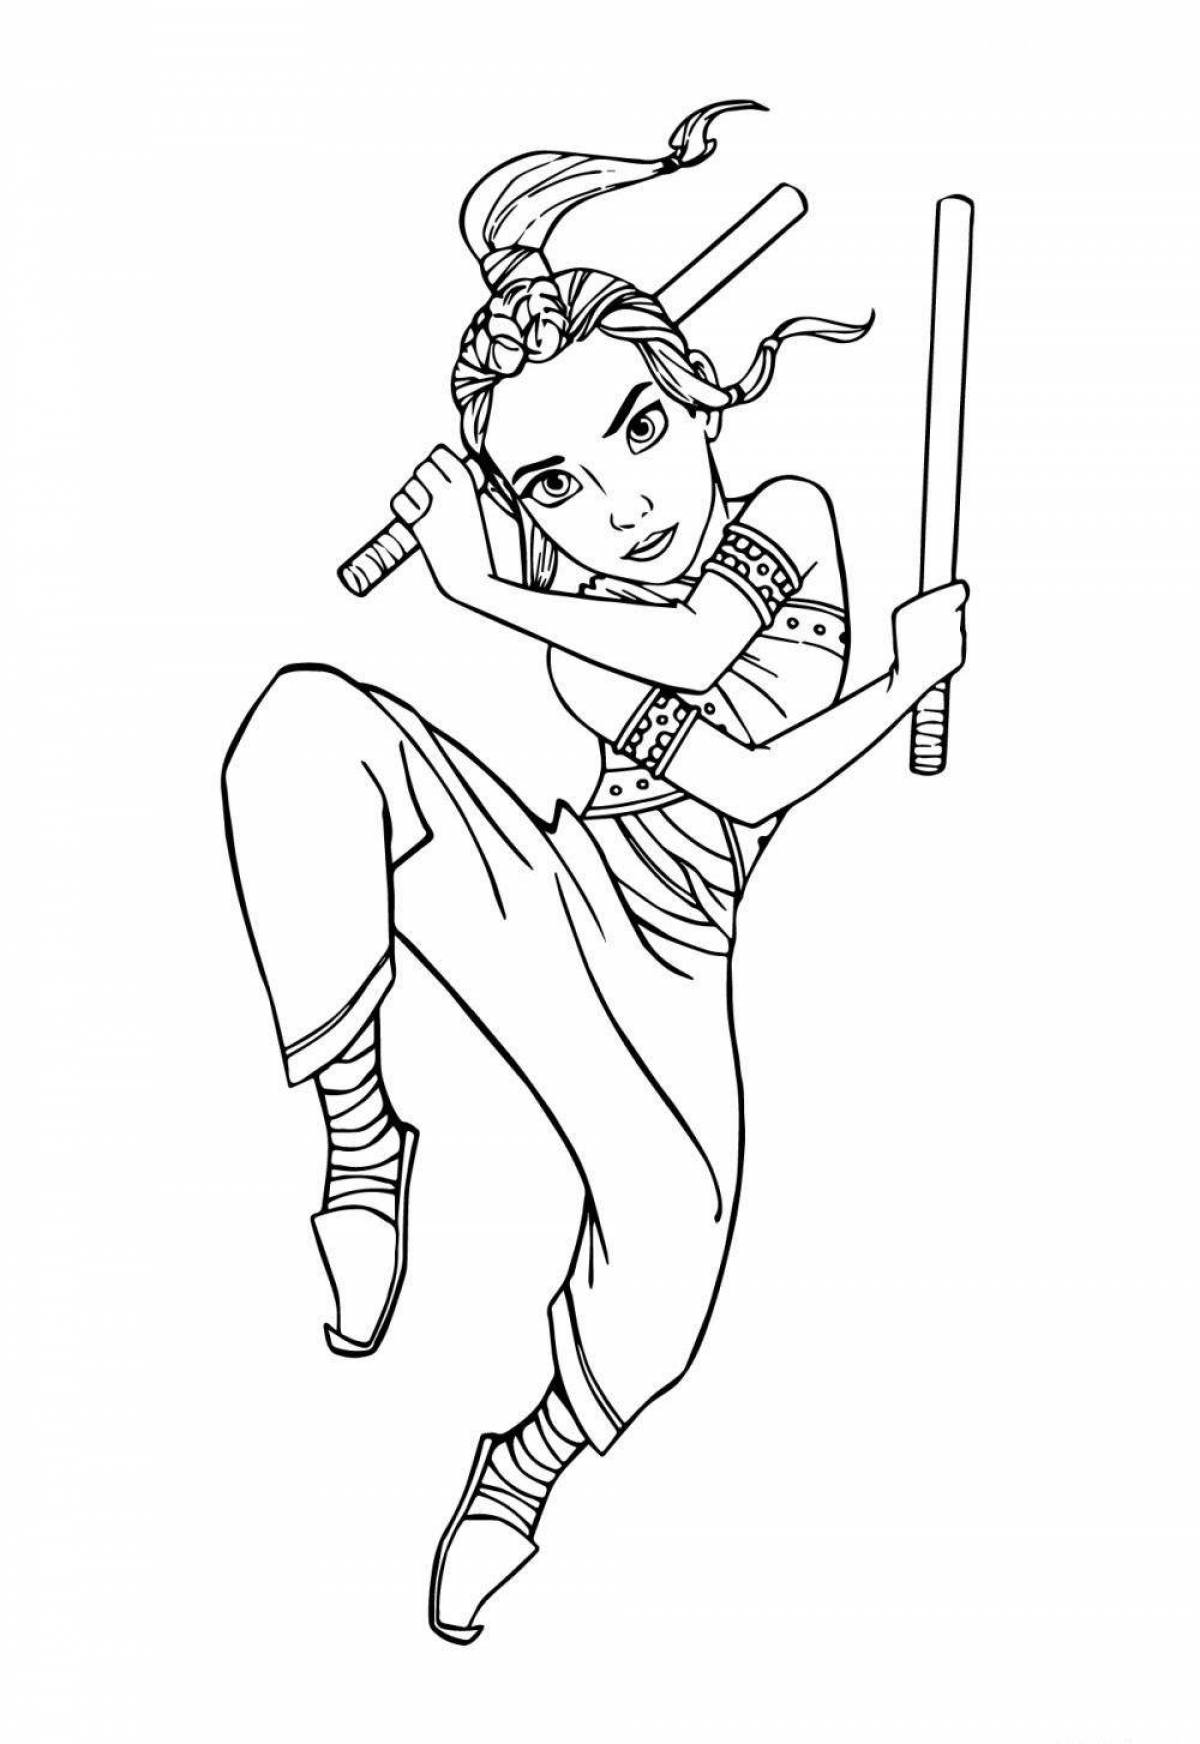 Joyful Paradise and Last Dragon Coloring Page